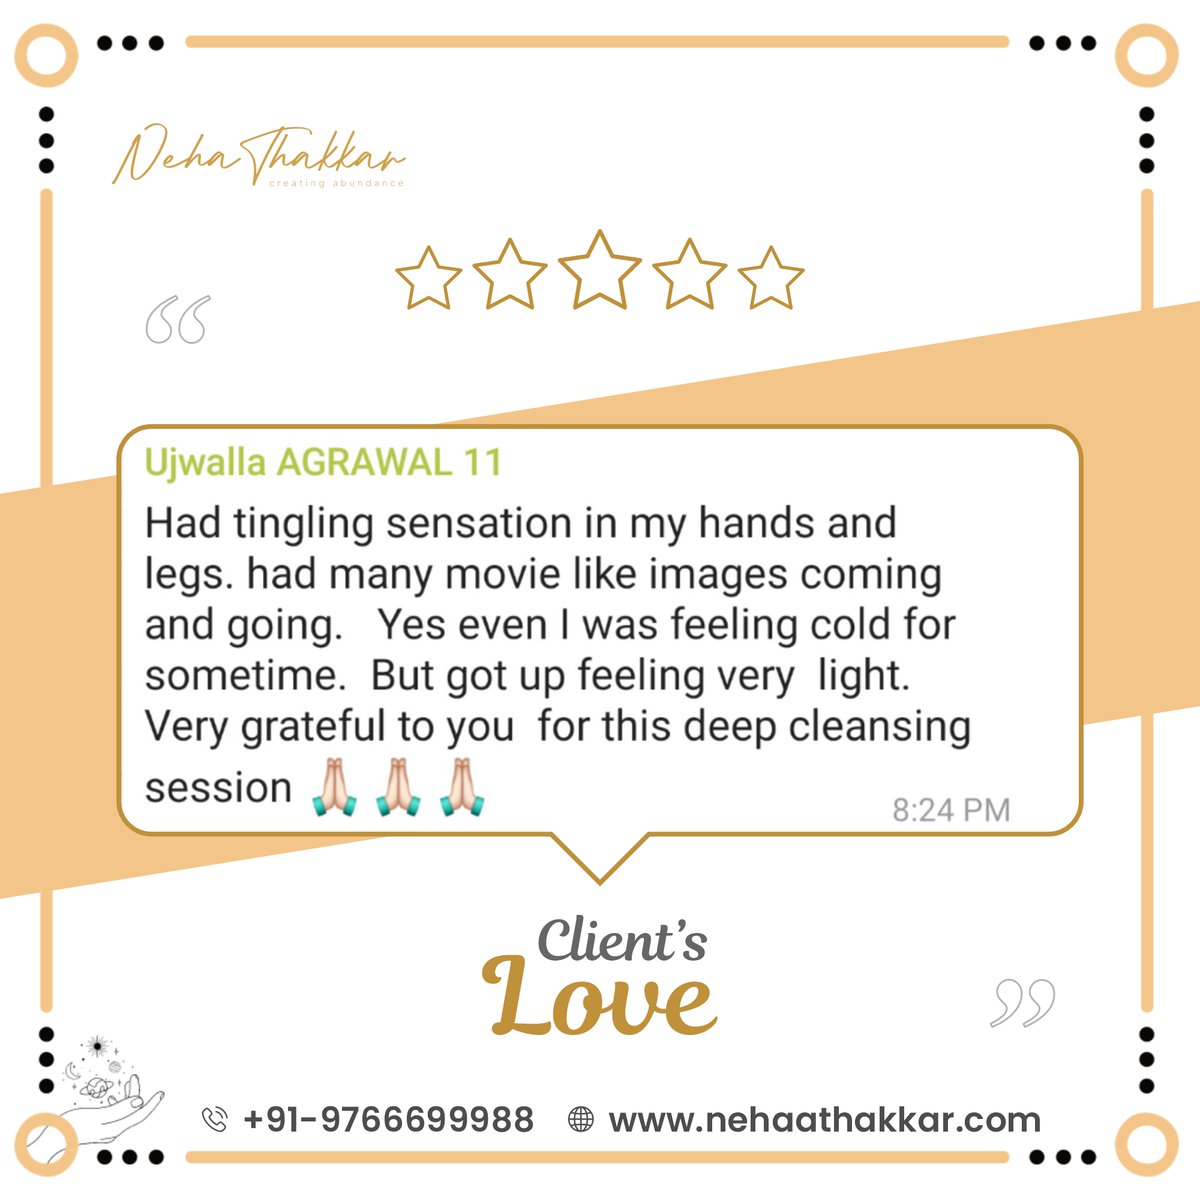 Feeling grateful for the positive feedback from our valued client! 🙌 Your satisfaction is our priority. Instagram instagram.com/nehathakkar_cr… Facebook facebook.com/nehathakkarcre… #ClientAppreciation #SuccessStories